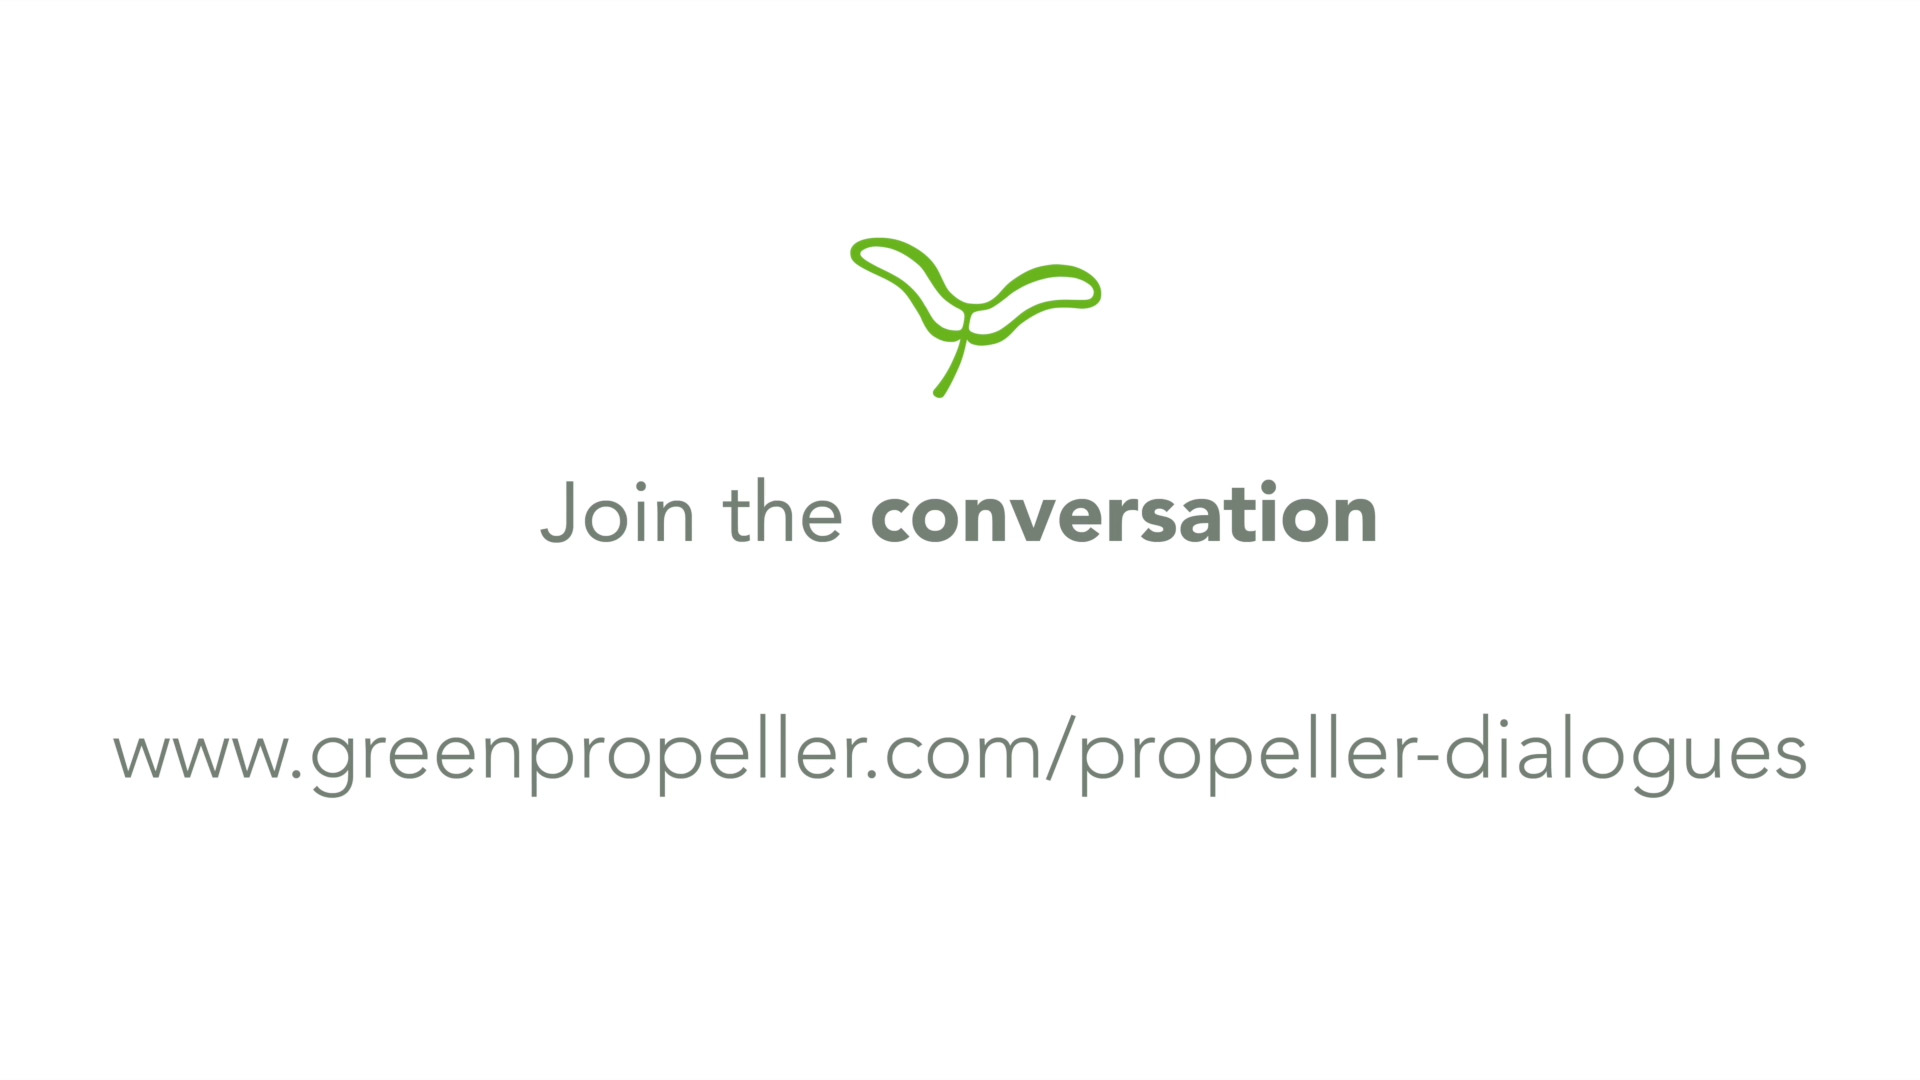 Join the conversation - The Propeller Dialogues